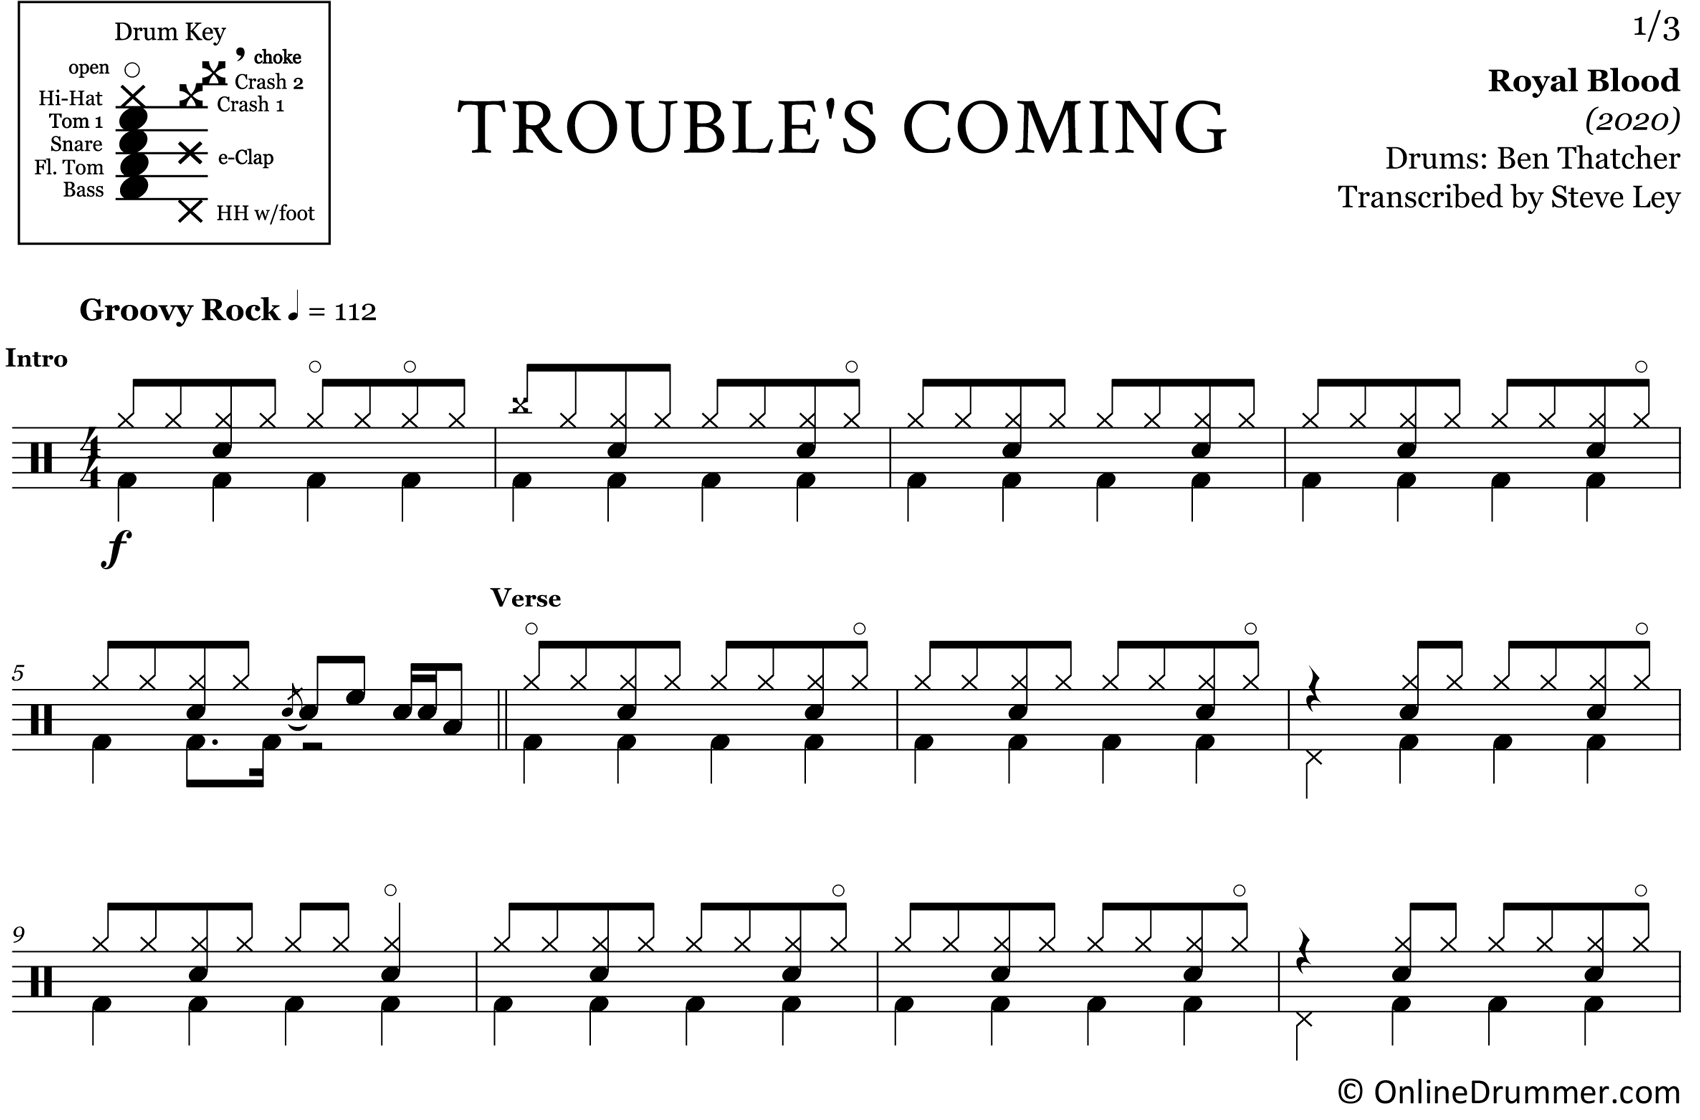 Trouble's Coming - Royal Blood - Drum Sheet Music